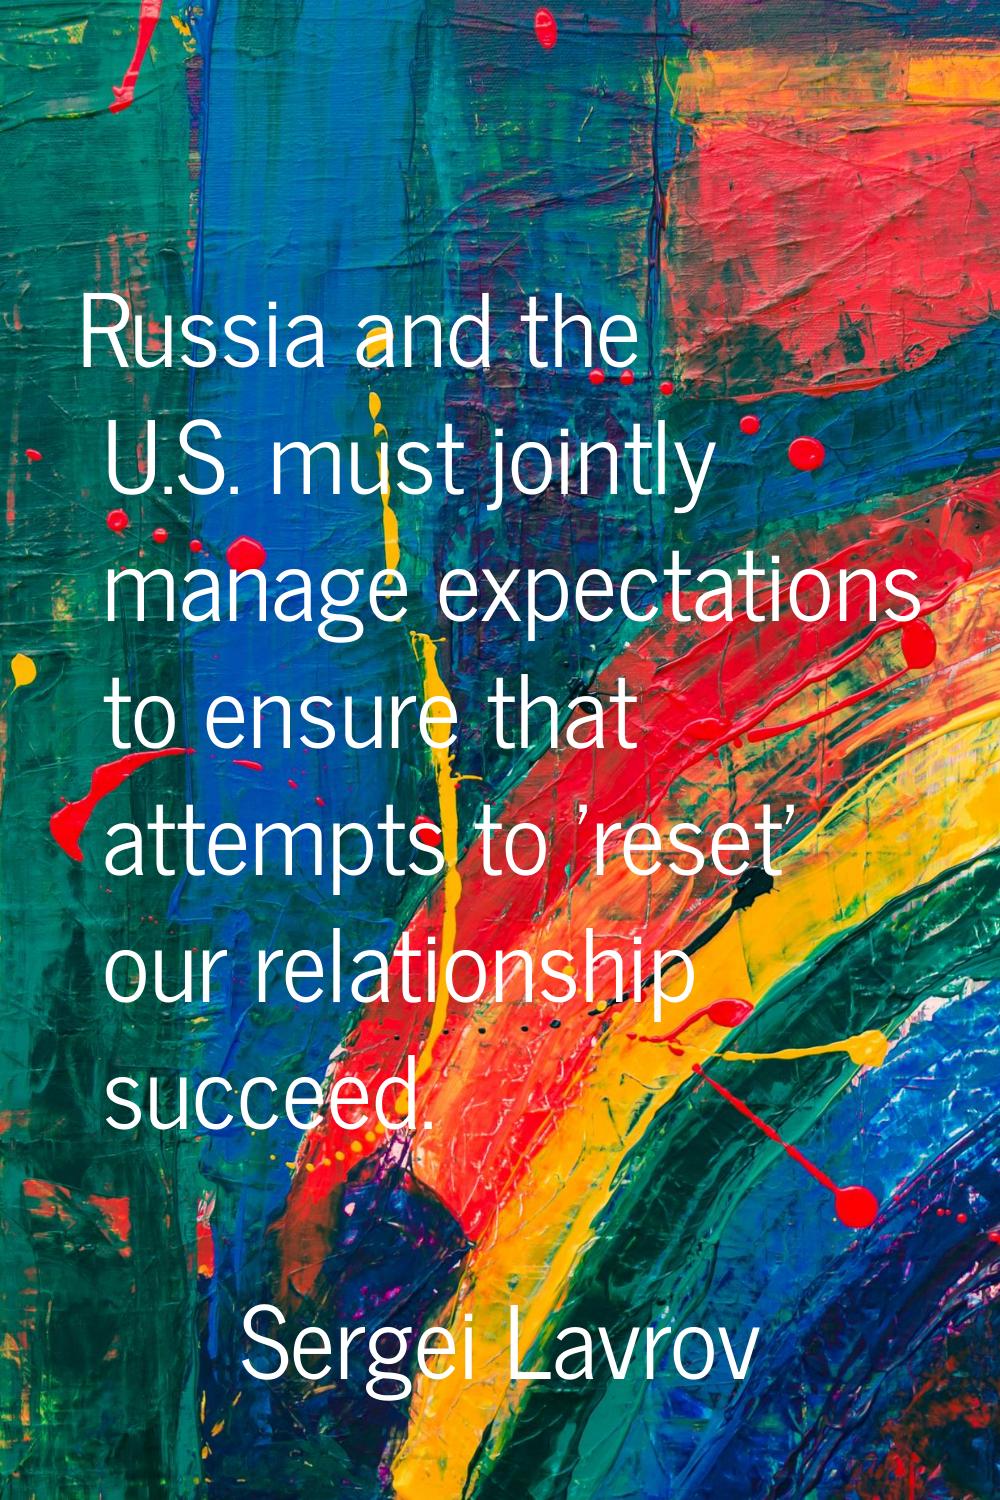 Russia and the U.S. must jointly manage expectations to ensure that attempts to 'reset' our relatio